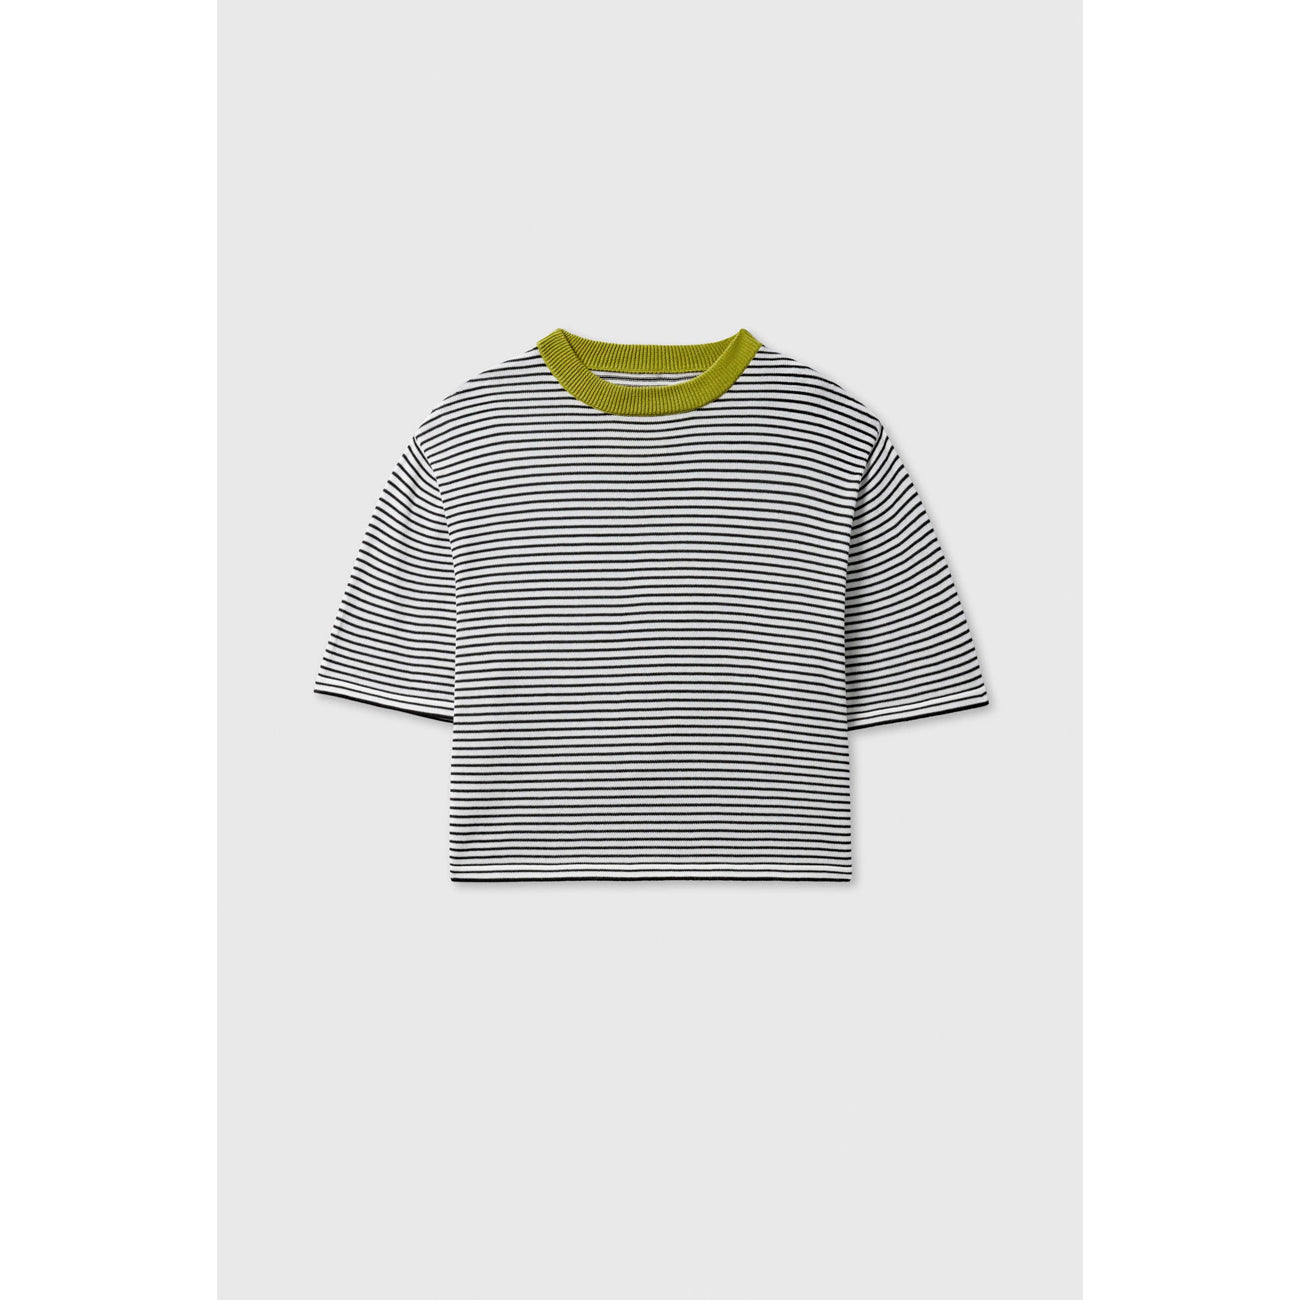 cotton striped t-shirt in lima